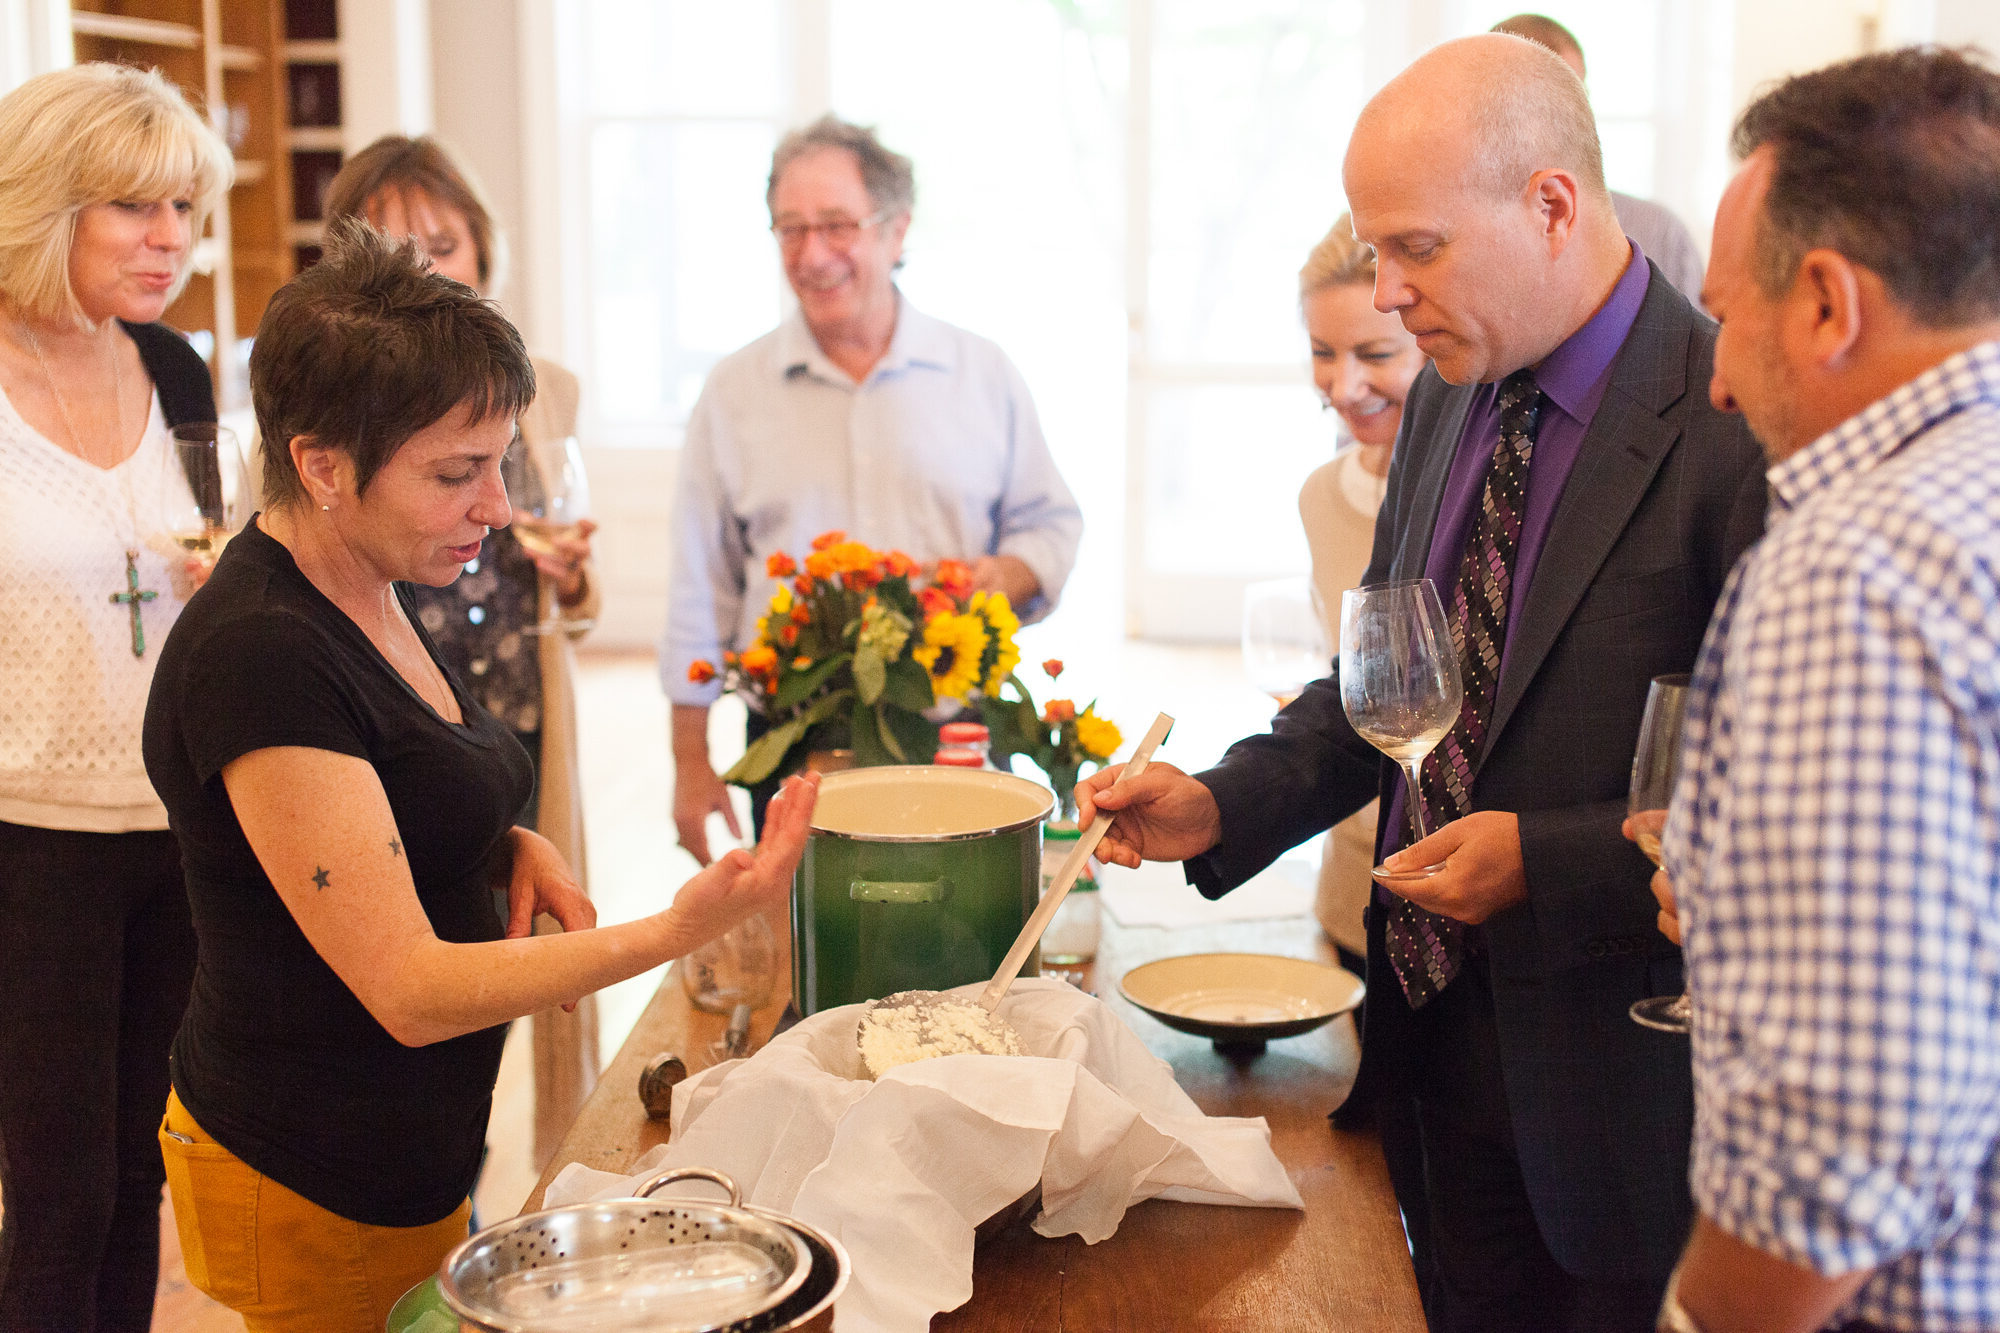 Cheese class hosted by Sheana Davis at the General's Daughter in Sonoma Calif. Photo by James Fanucchi